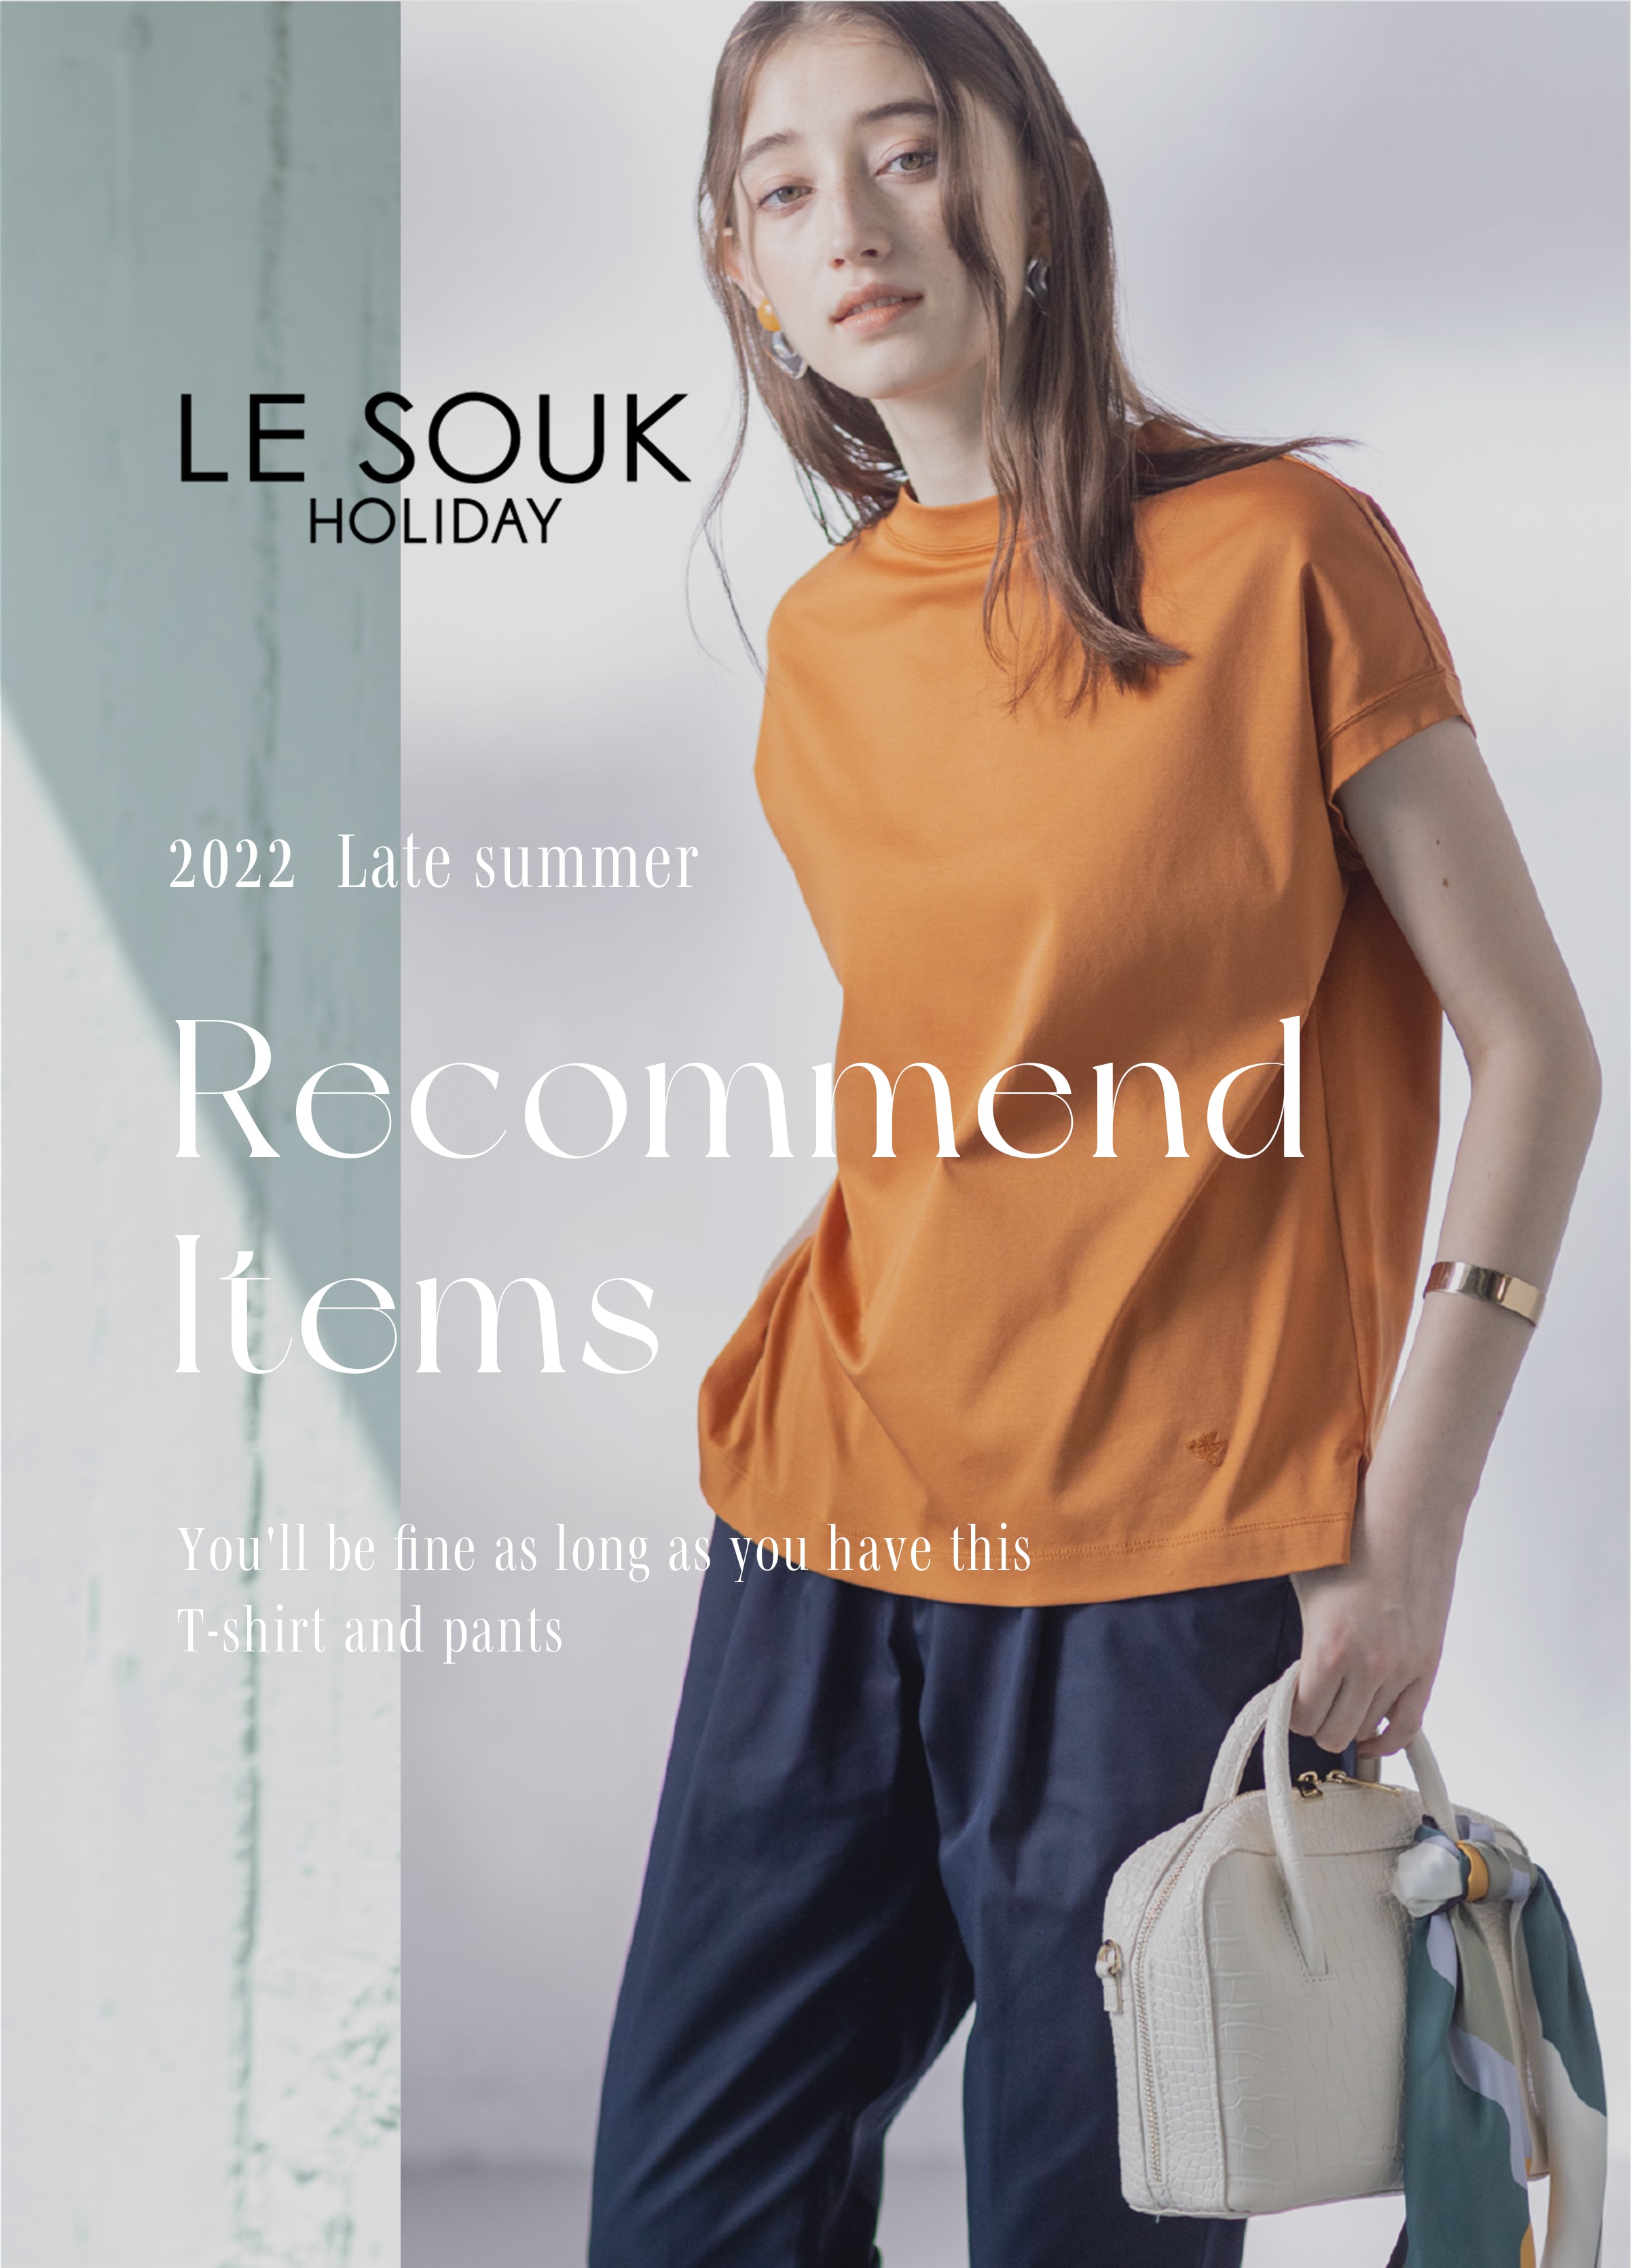 LE SOUK HOLIDAY 2022 Late summer Recommend Items